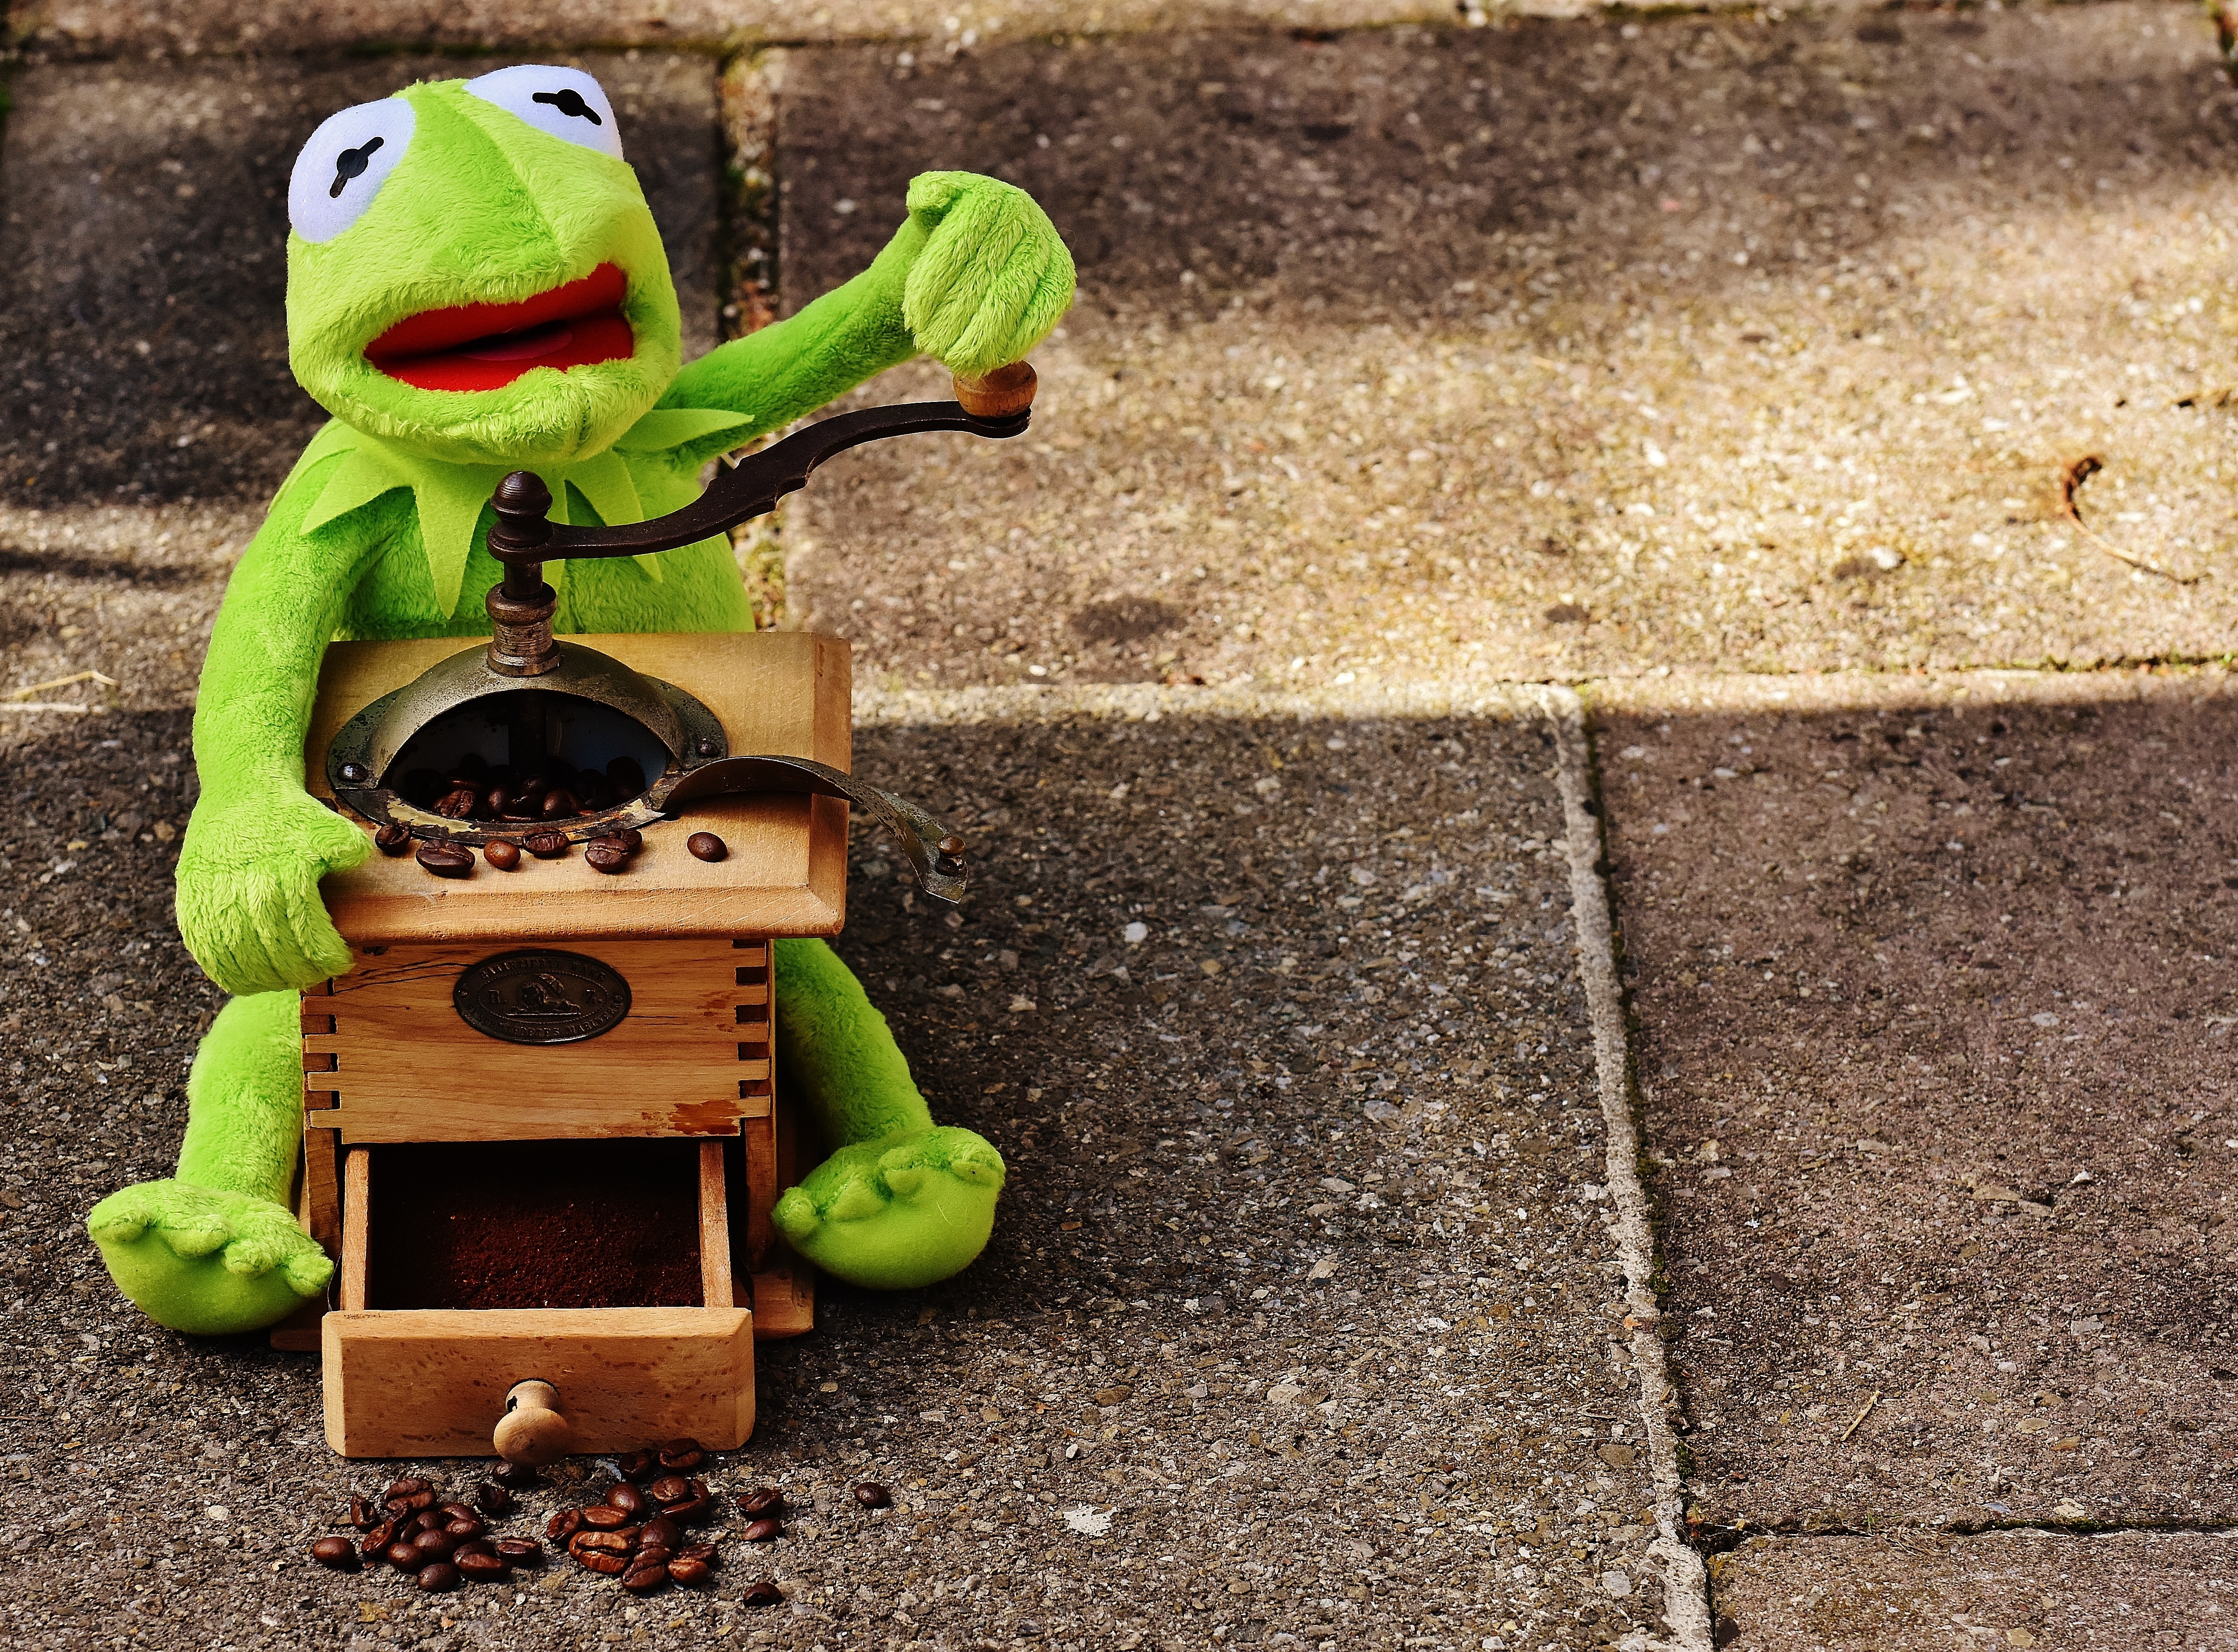 green frog plush toy and brown wood manual coffee grinder